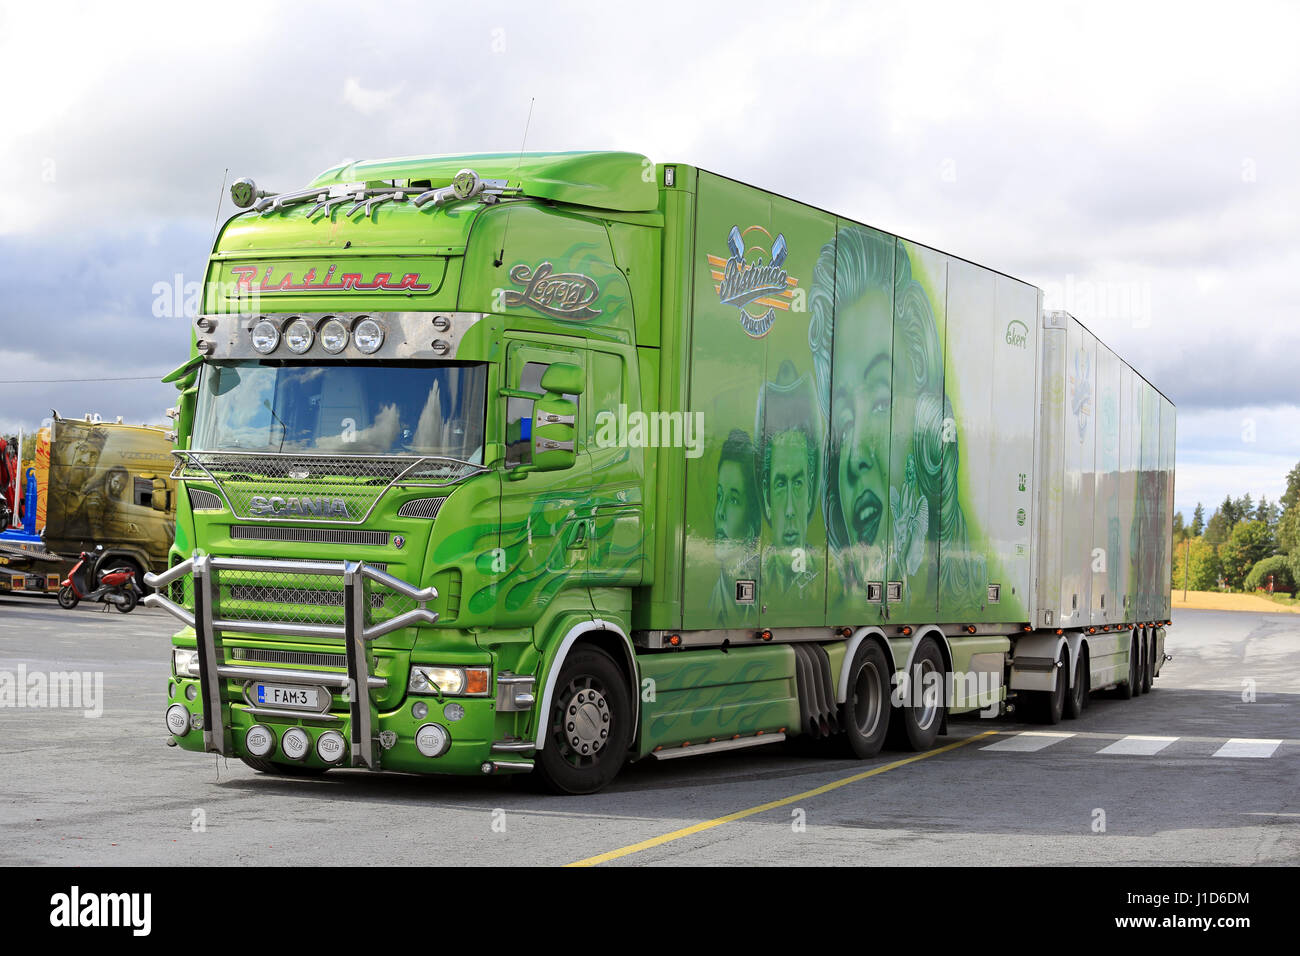 JALASJARVI, FINLAND - AUGUST 11, 2016: Lime green Scania R500 year 2008 Legend of Ristimaa Trucking visits Jalasjarvi truck stop. Stock Photo